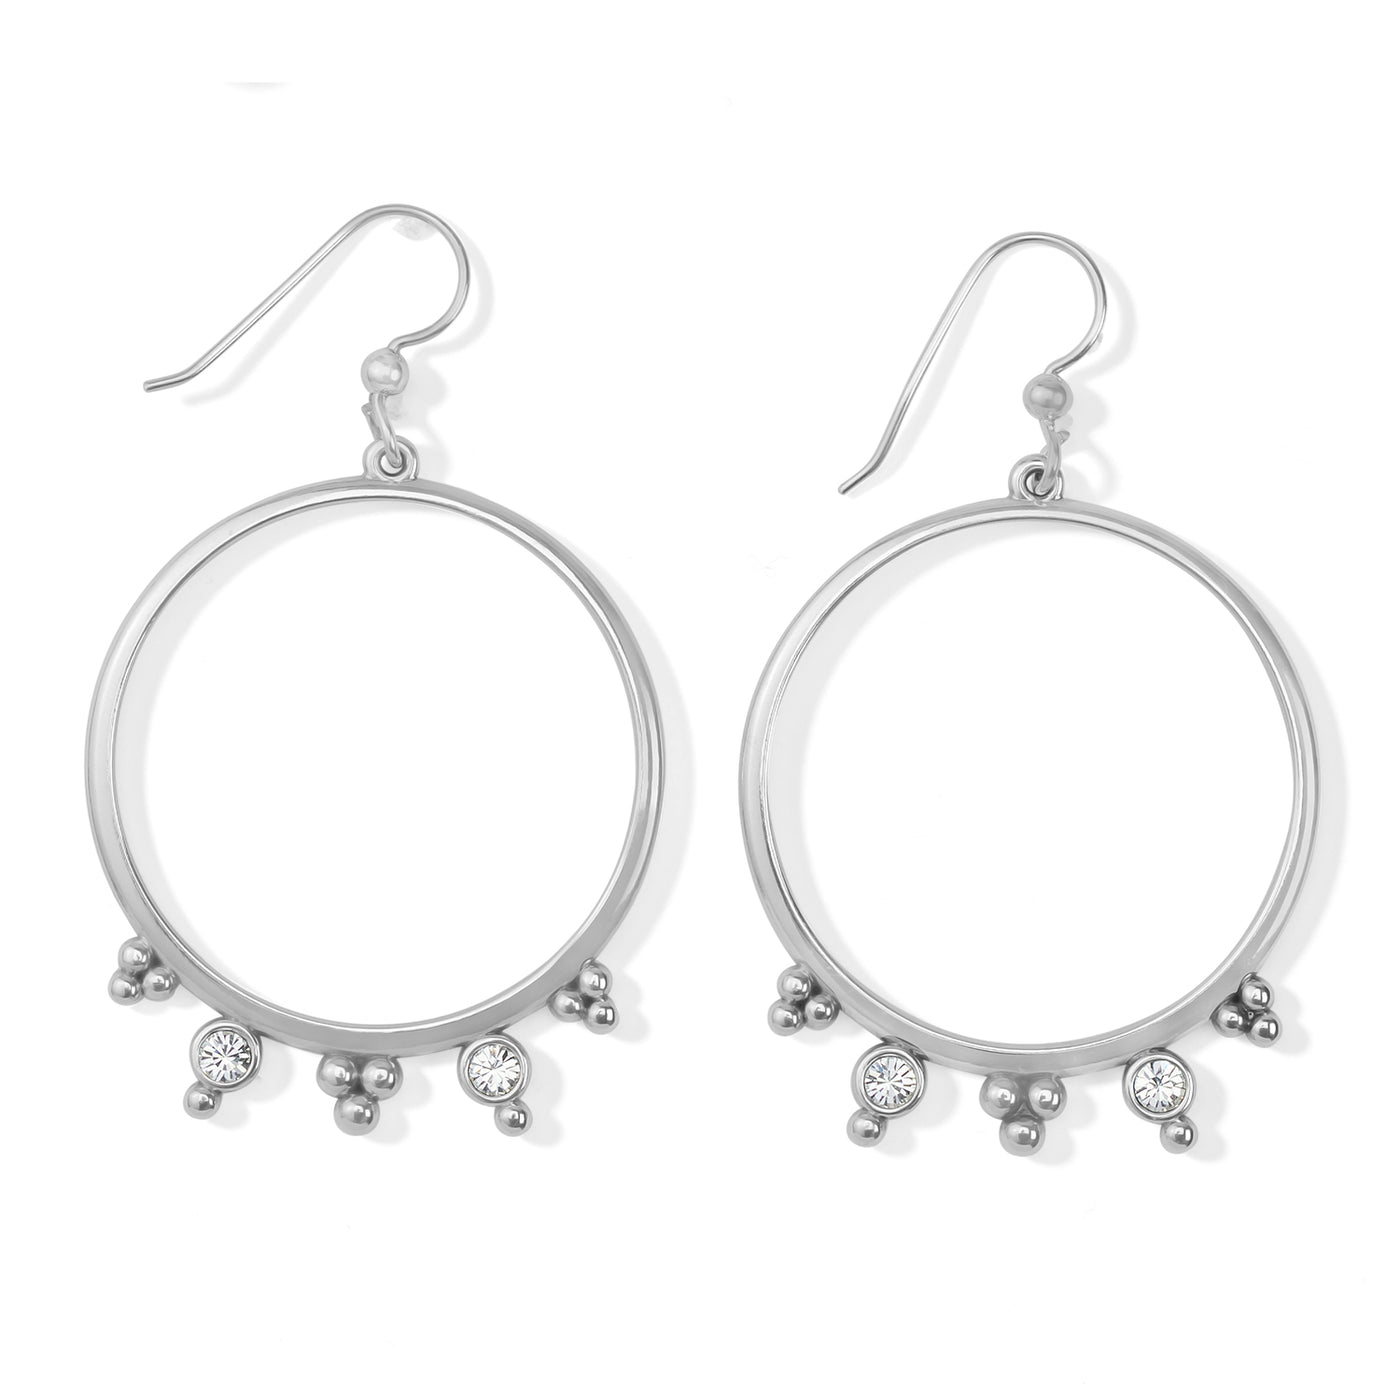 Twinkle Granulation Round French Earrings